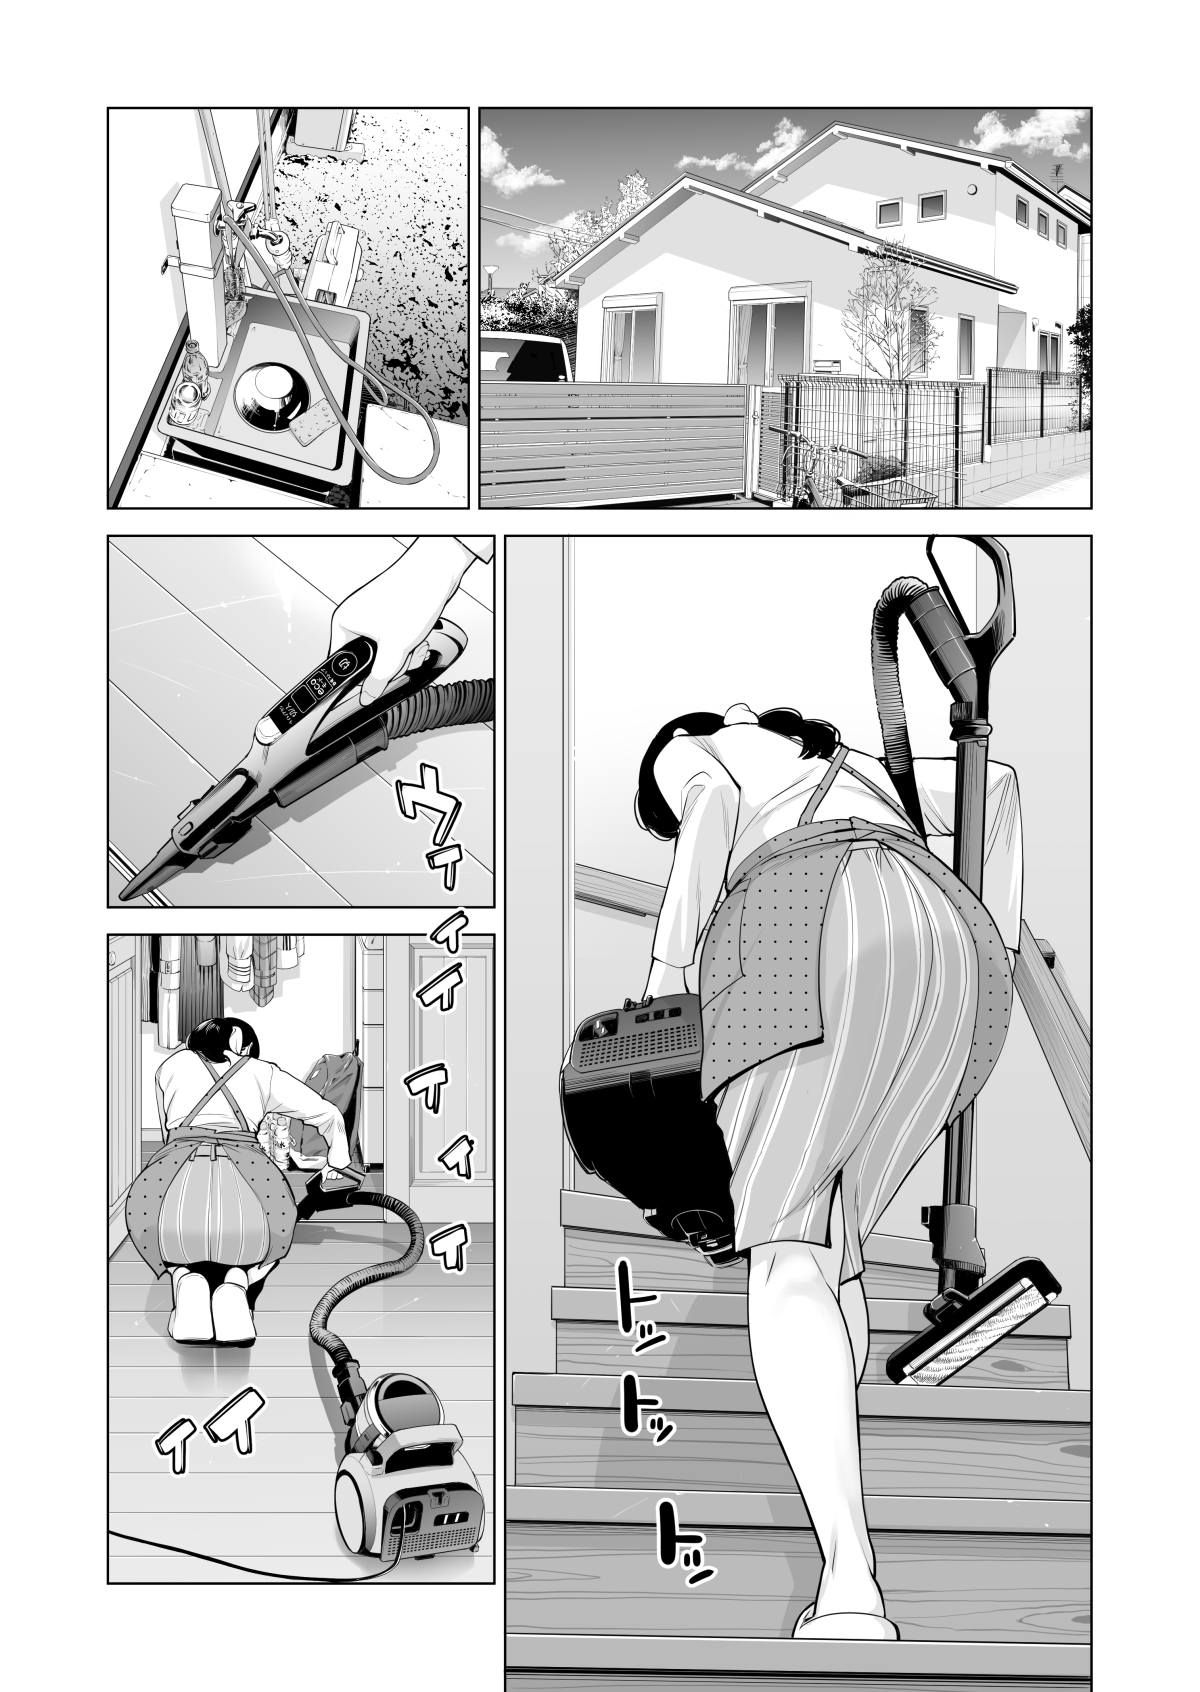 Tsukiyo no Midare Zake  Moonlit Intoxication ~ A Housewife Stolen by a Coworker Besides her Blackout Drunk Husband ~ Chapter 1 numero d'image 11